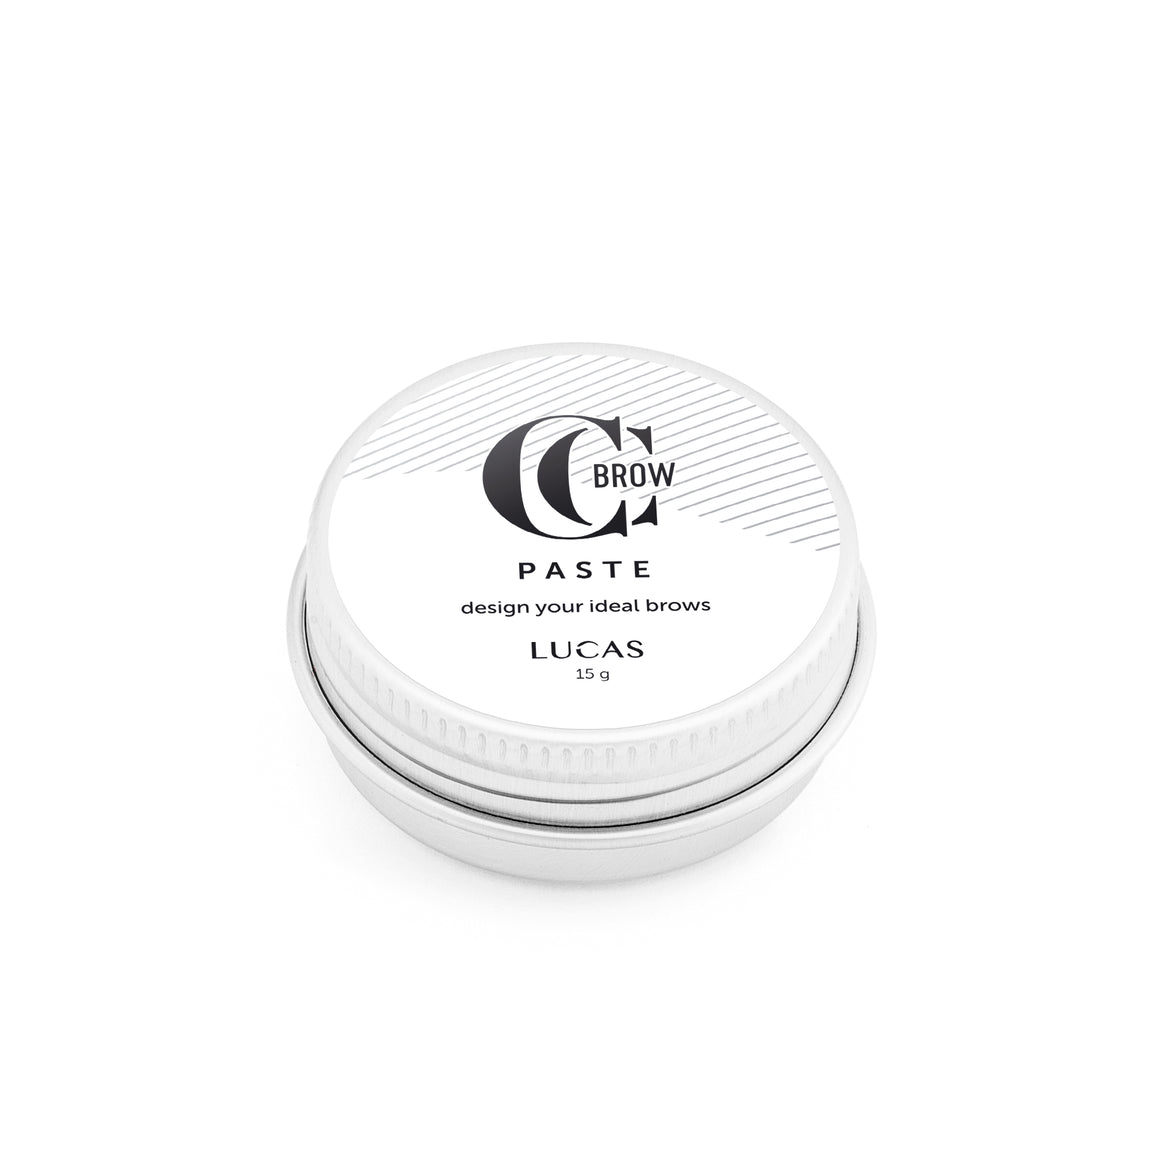 Brow Paste by CC Brow - Beauty Shop Direct